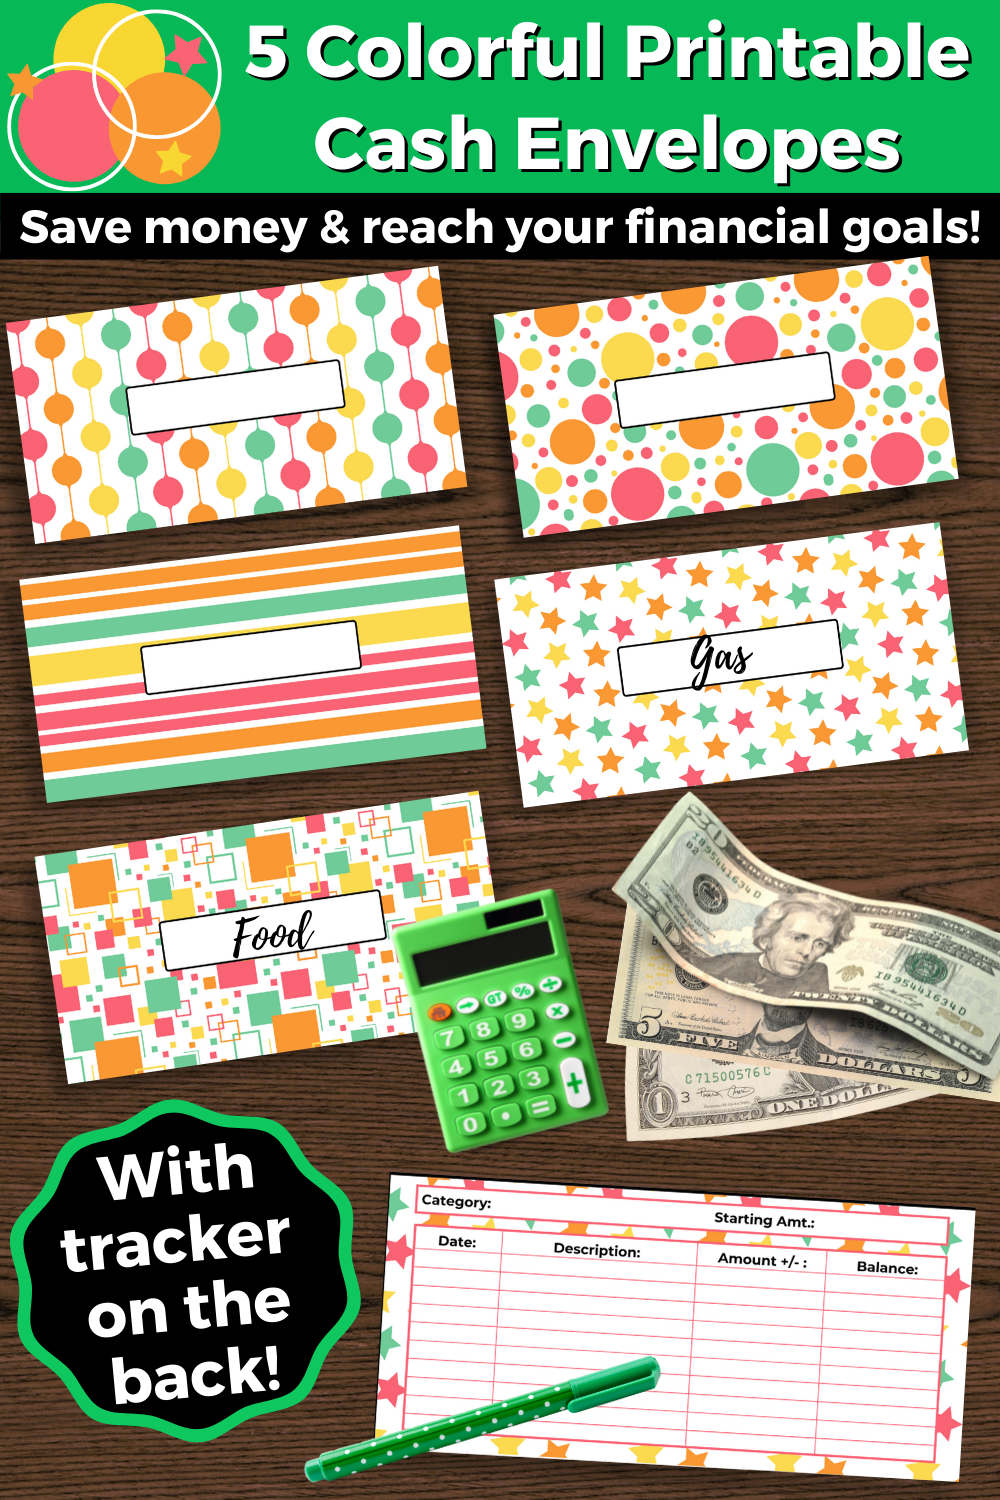 5 Colorful Printable Cash Envelopes with Transaction Tracker- For Instant Download